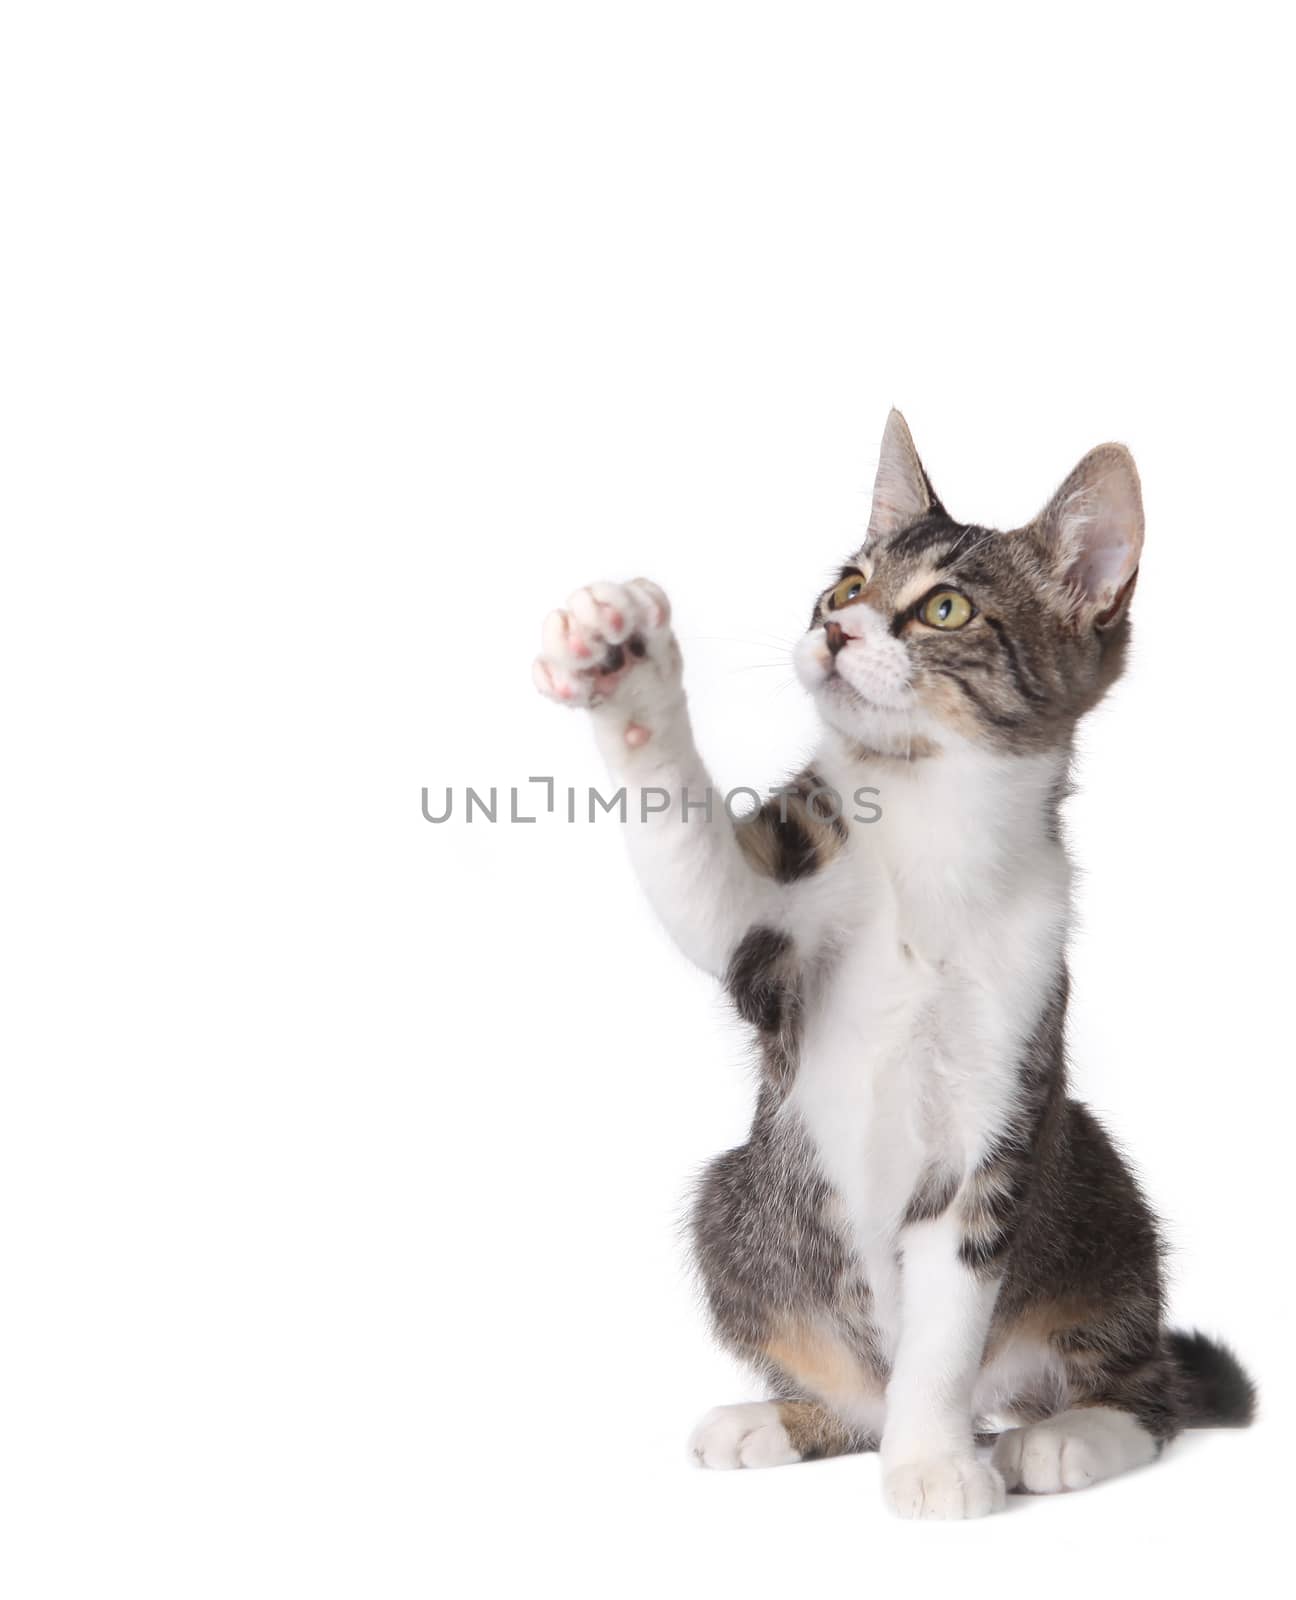 Cute Kitten Pawing at Something in the Air